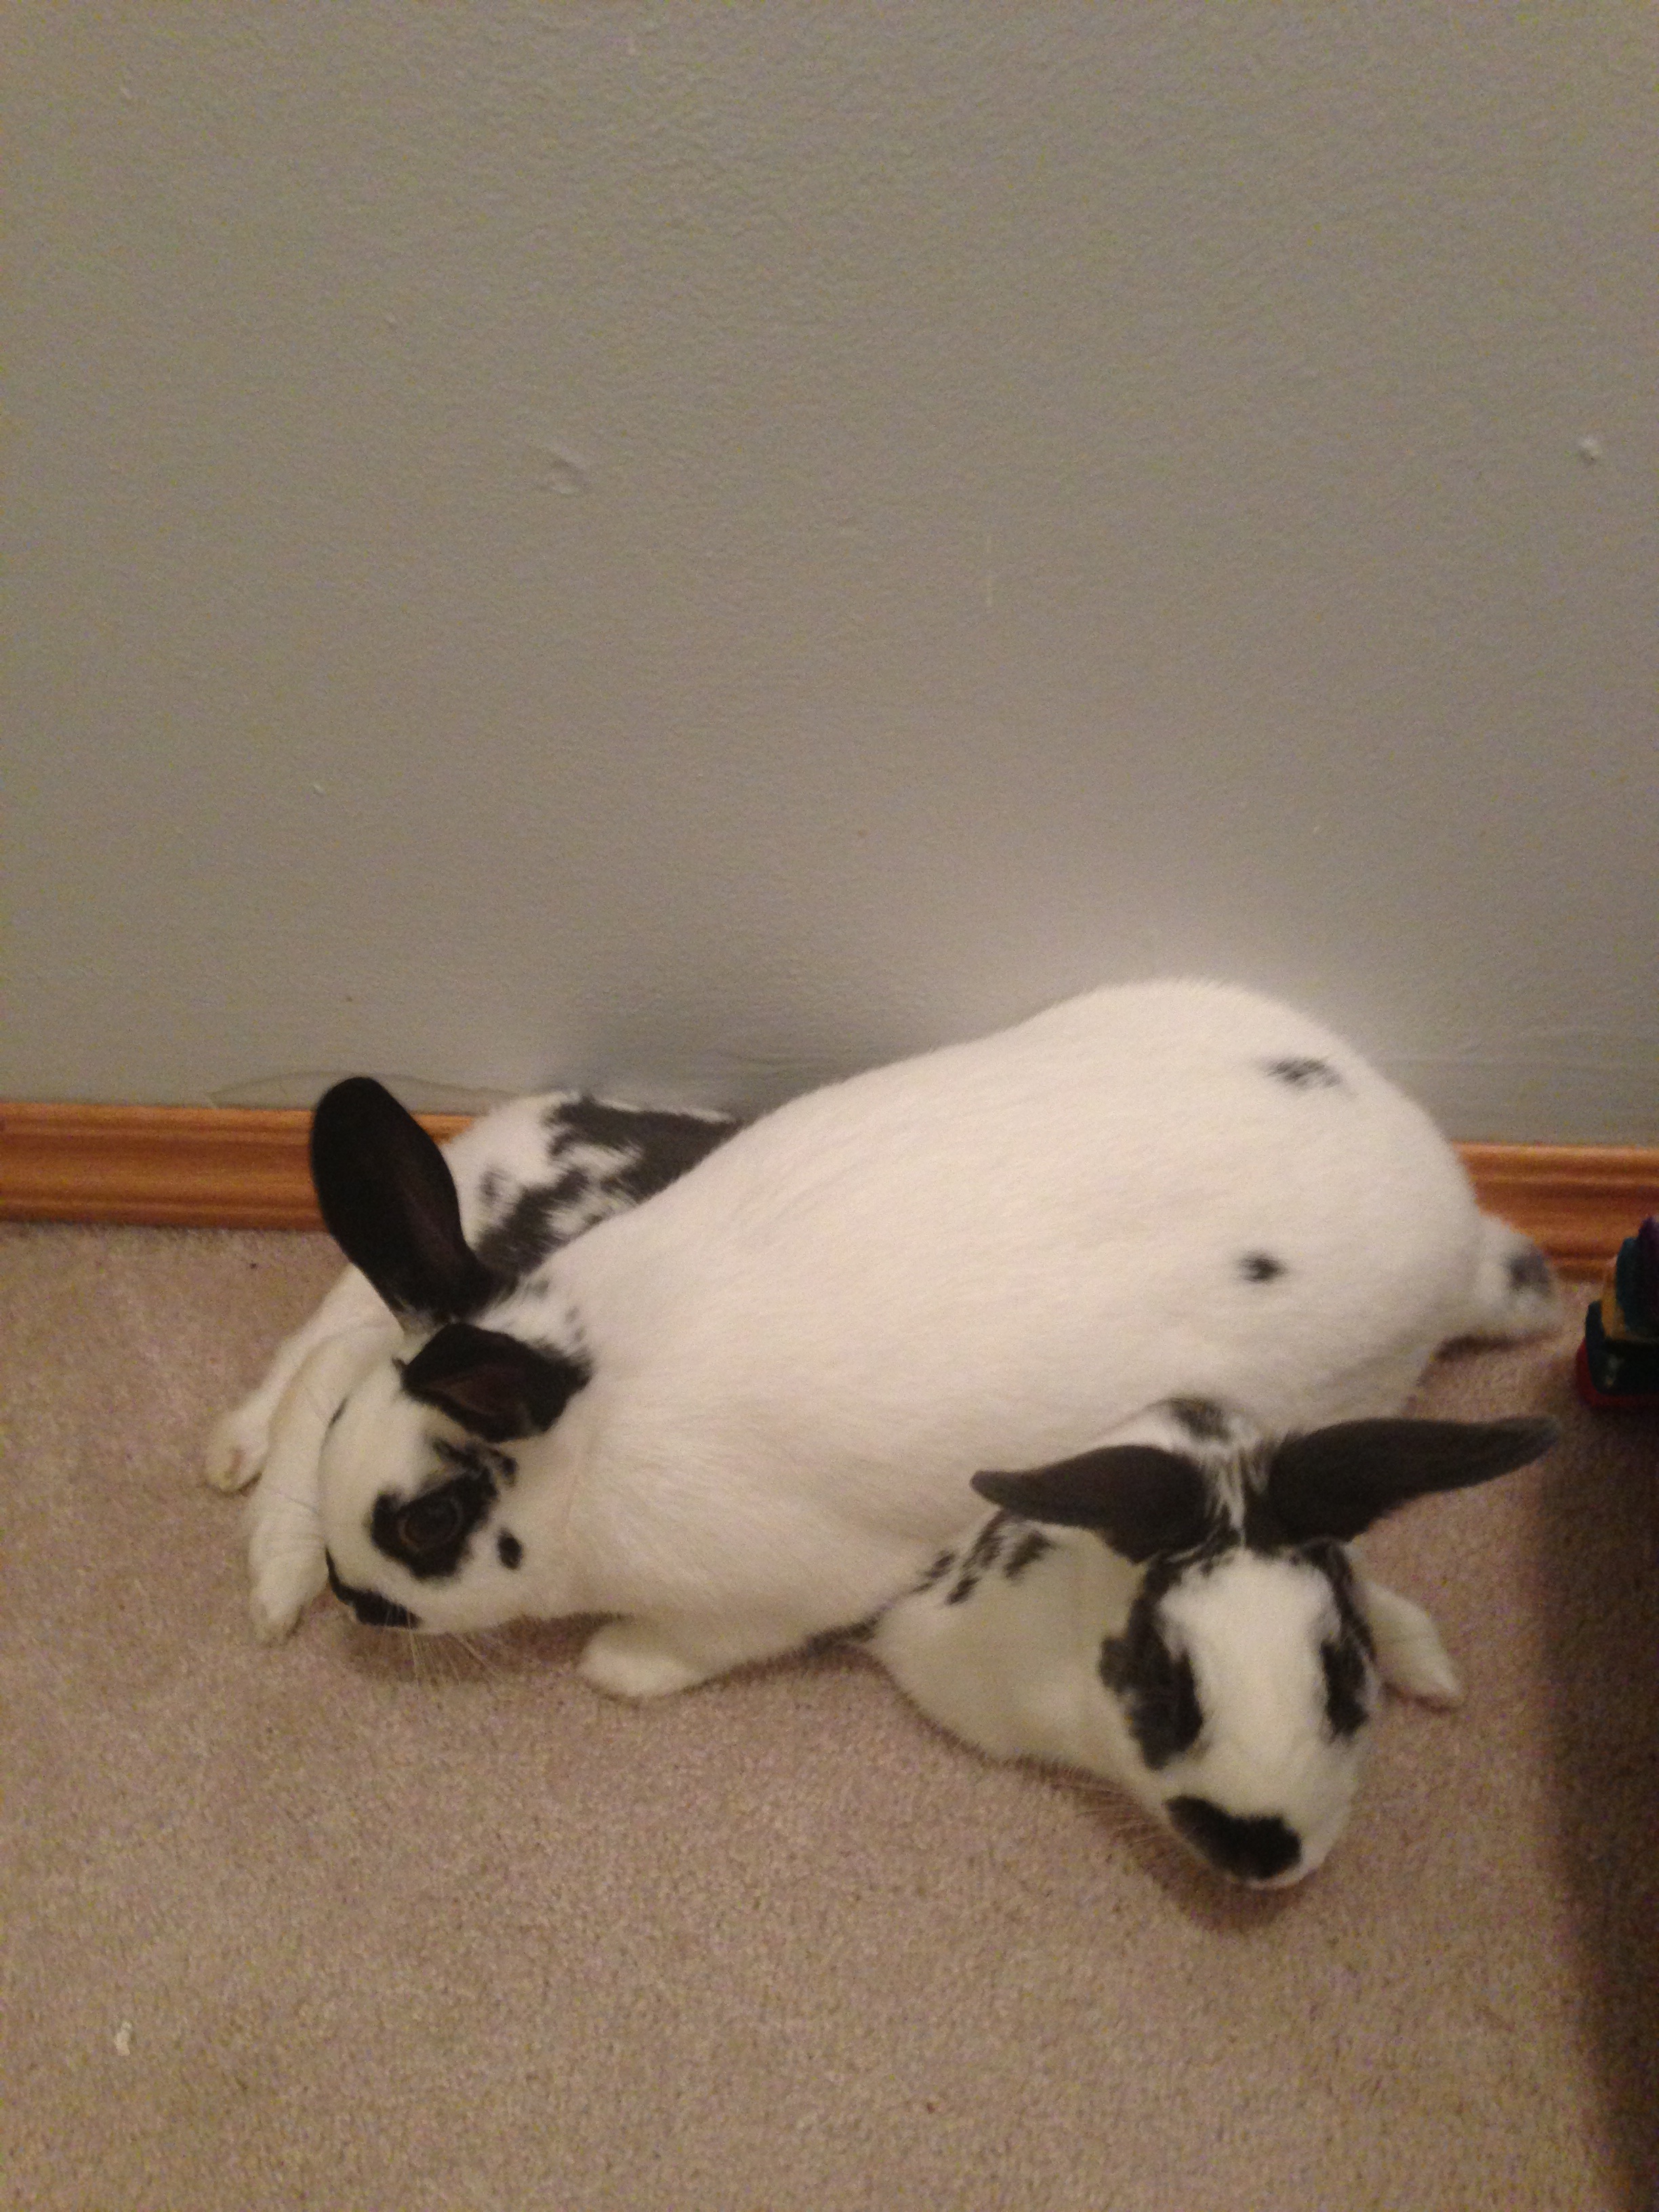 Bunny Protects His Sister from the Noisy Fireworks 2